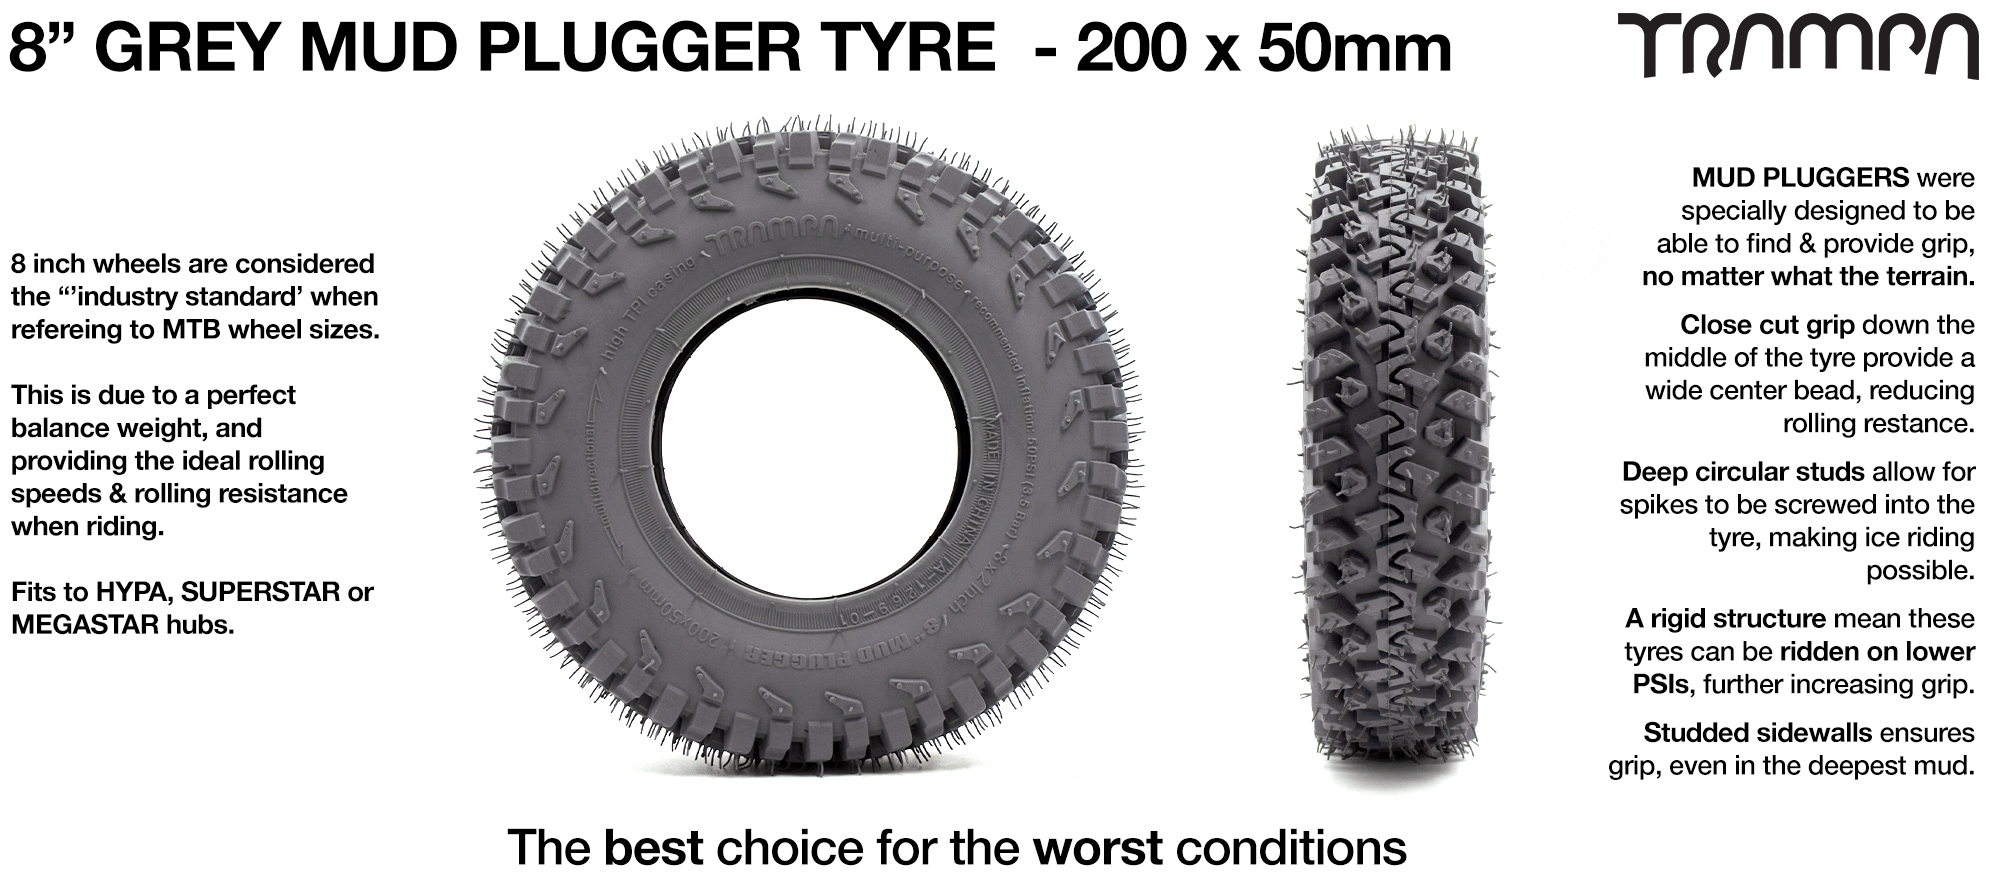 8 Inch MUD-PLUGGER Tyres - GREY 